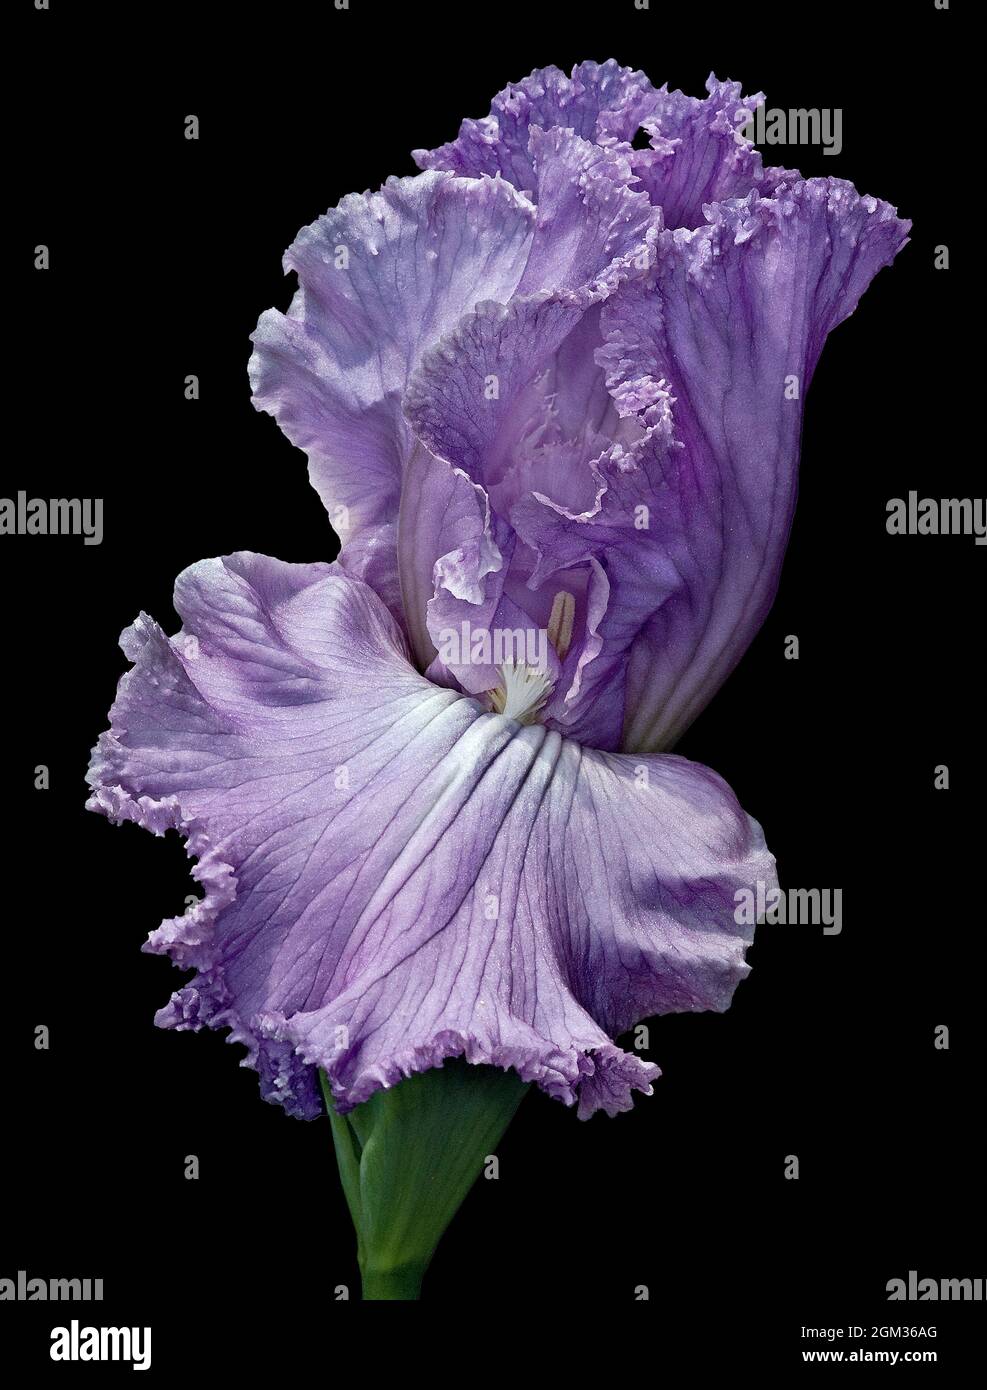 Elegant Lady Iris Flower - Single gracious lavender Bearded Iris flower against a black background.  This image is available in color as well as black Stock Photo